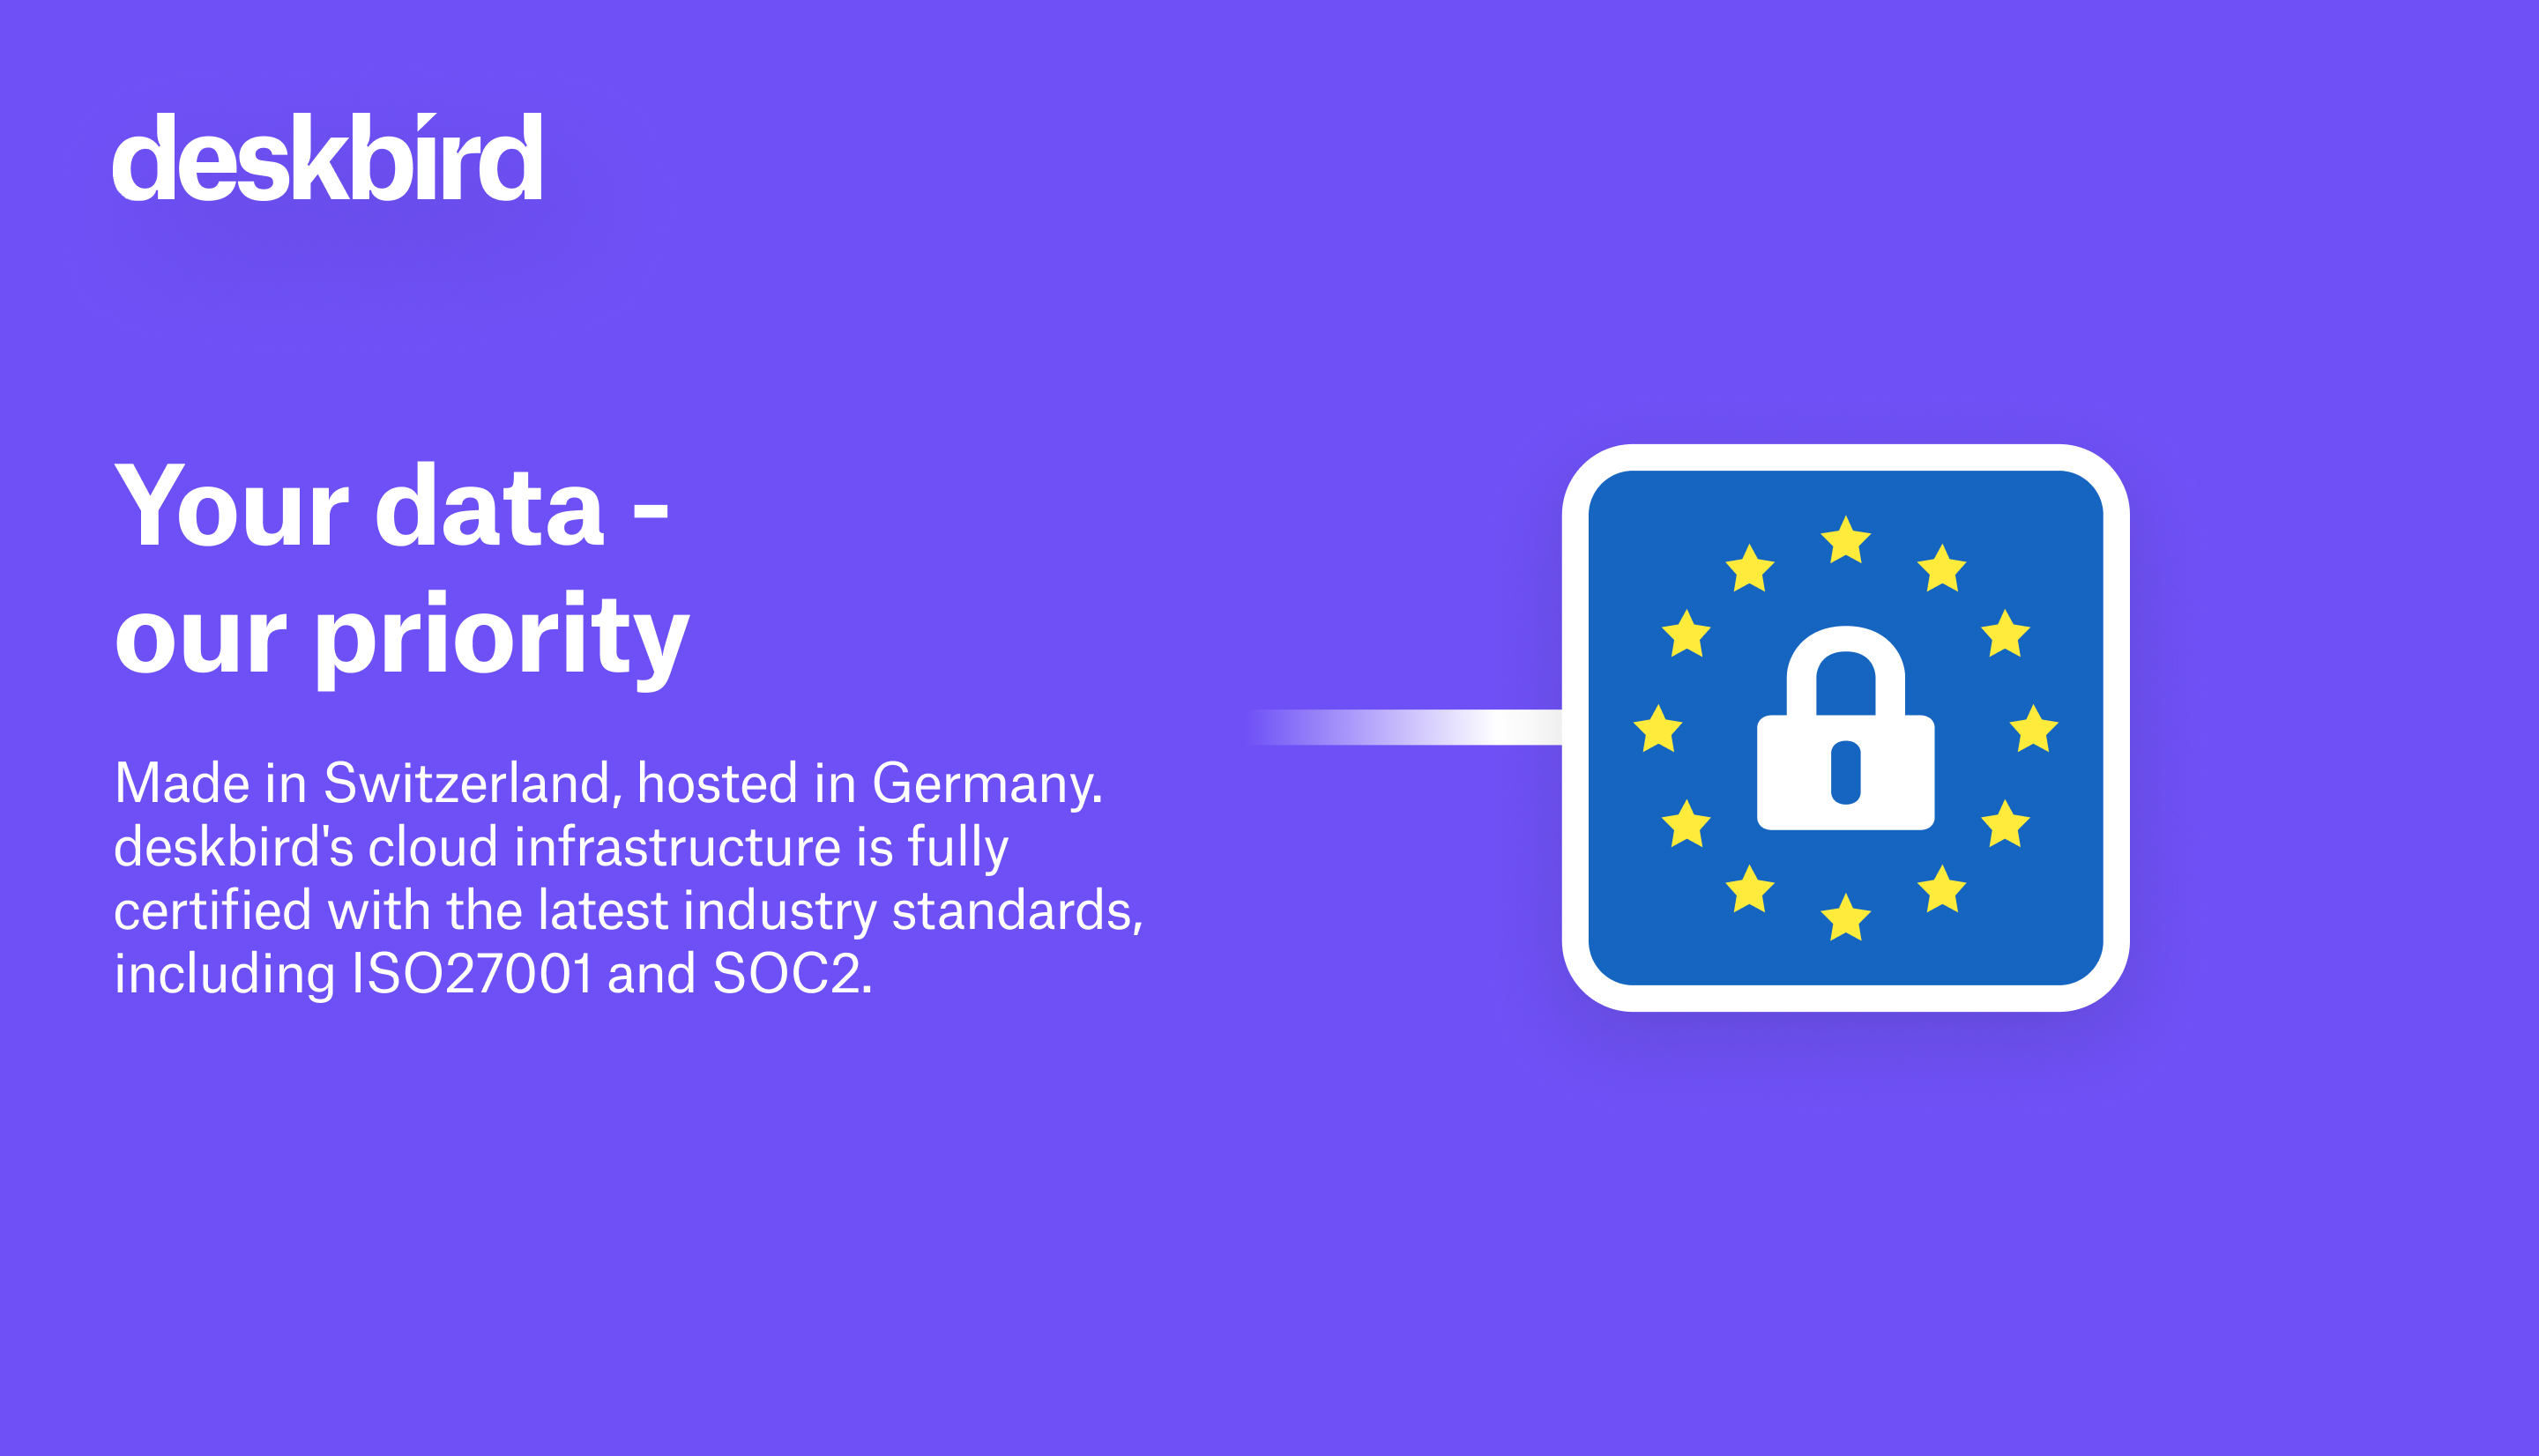 Data hosted in Germany